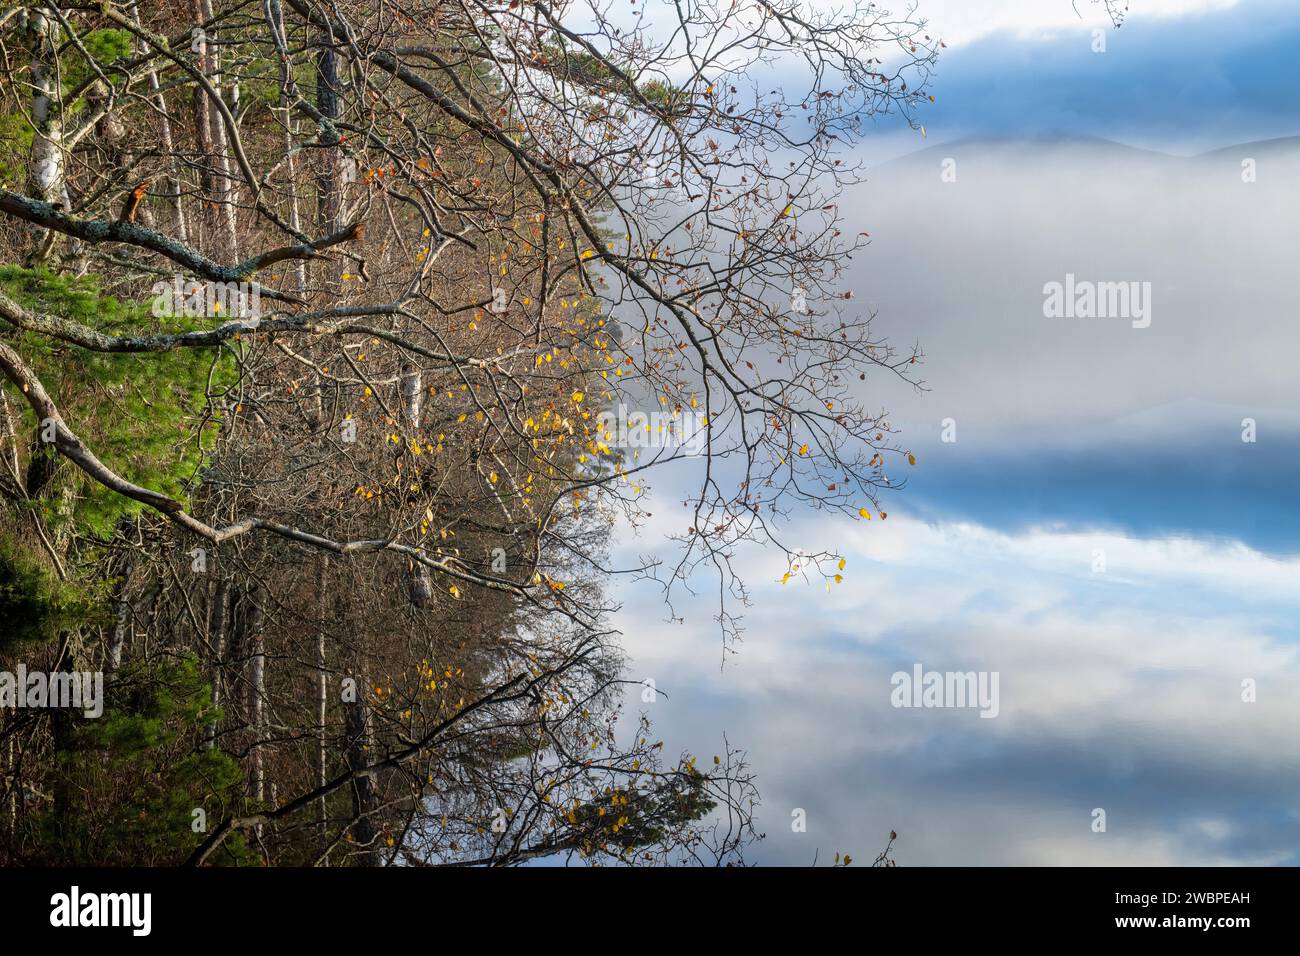 Birch tree branches and clouds reflecting in a loch. Highlands, Scotland Stock Photo